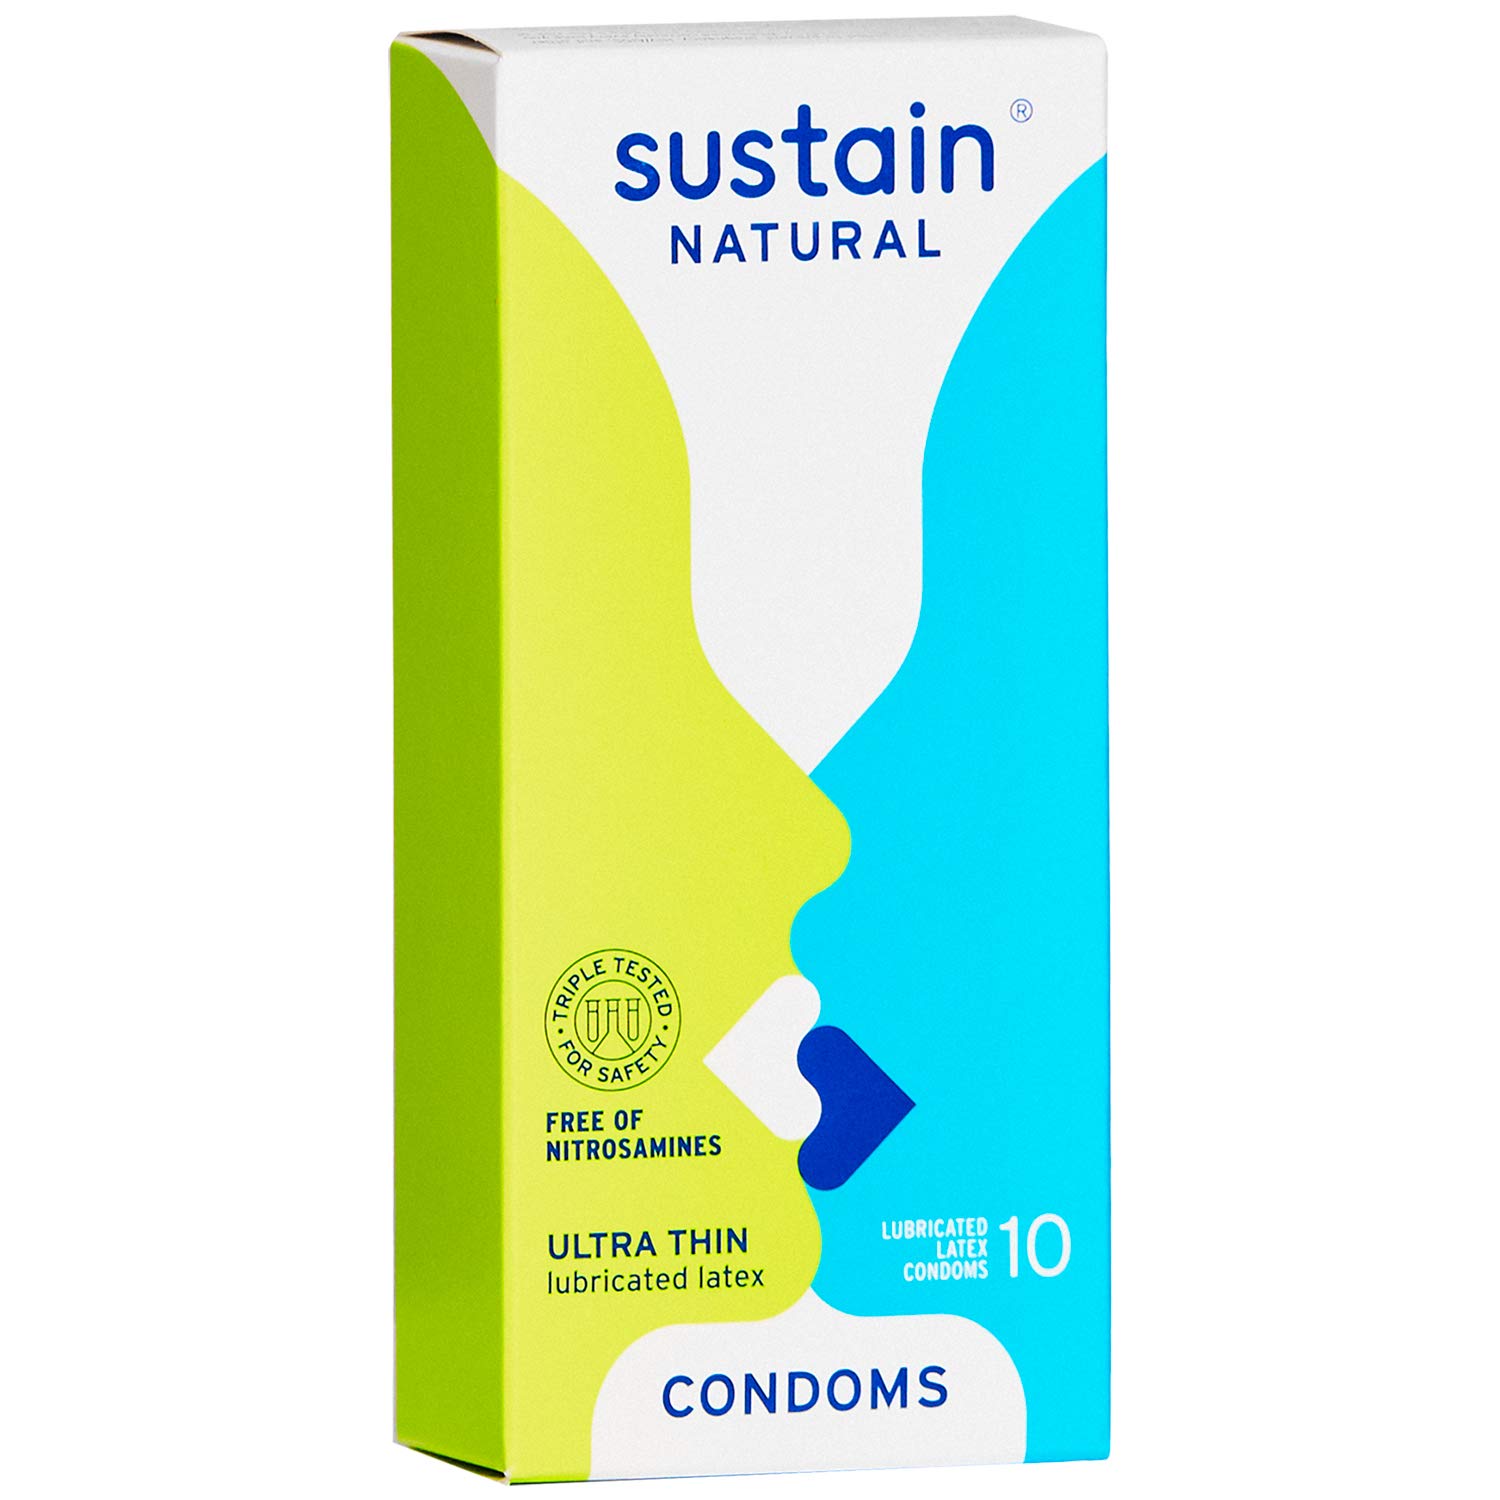 Best Natural & For A Sustainable Sex Life